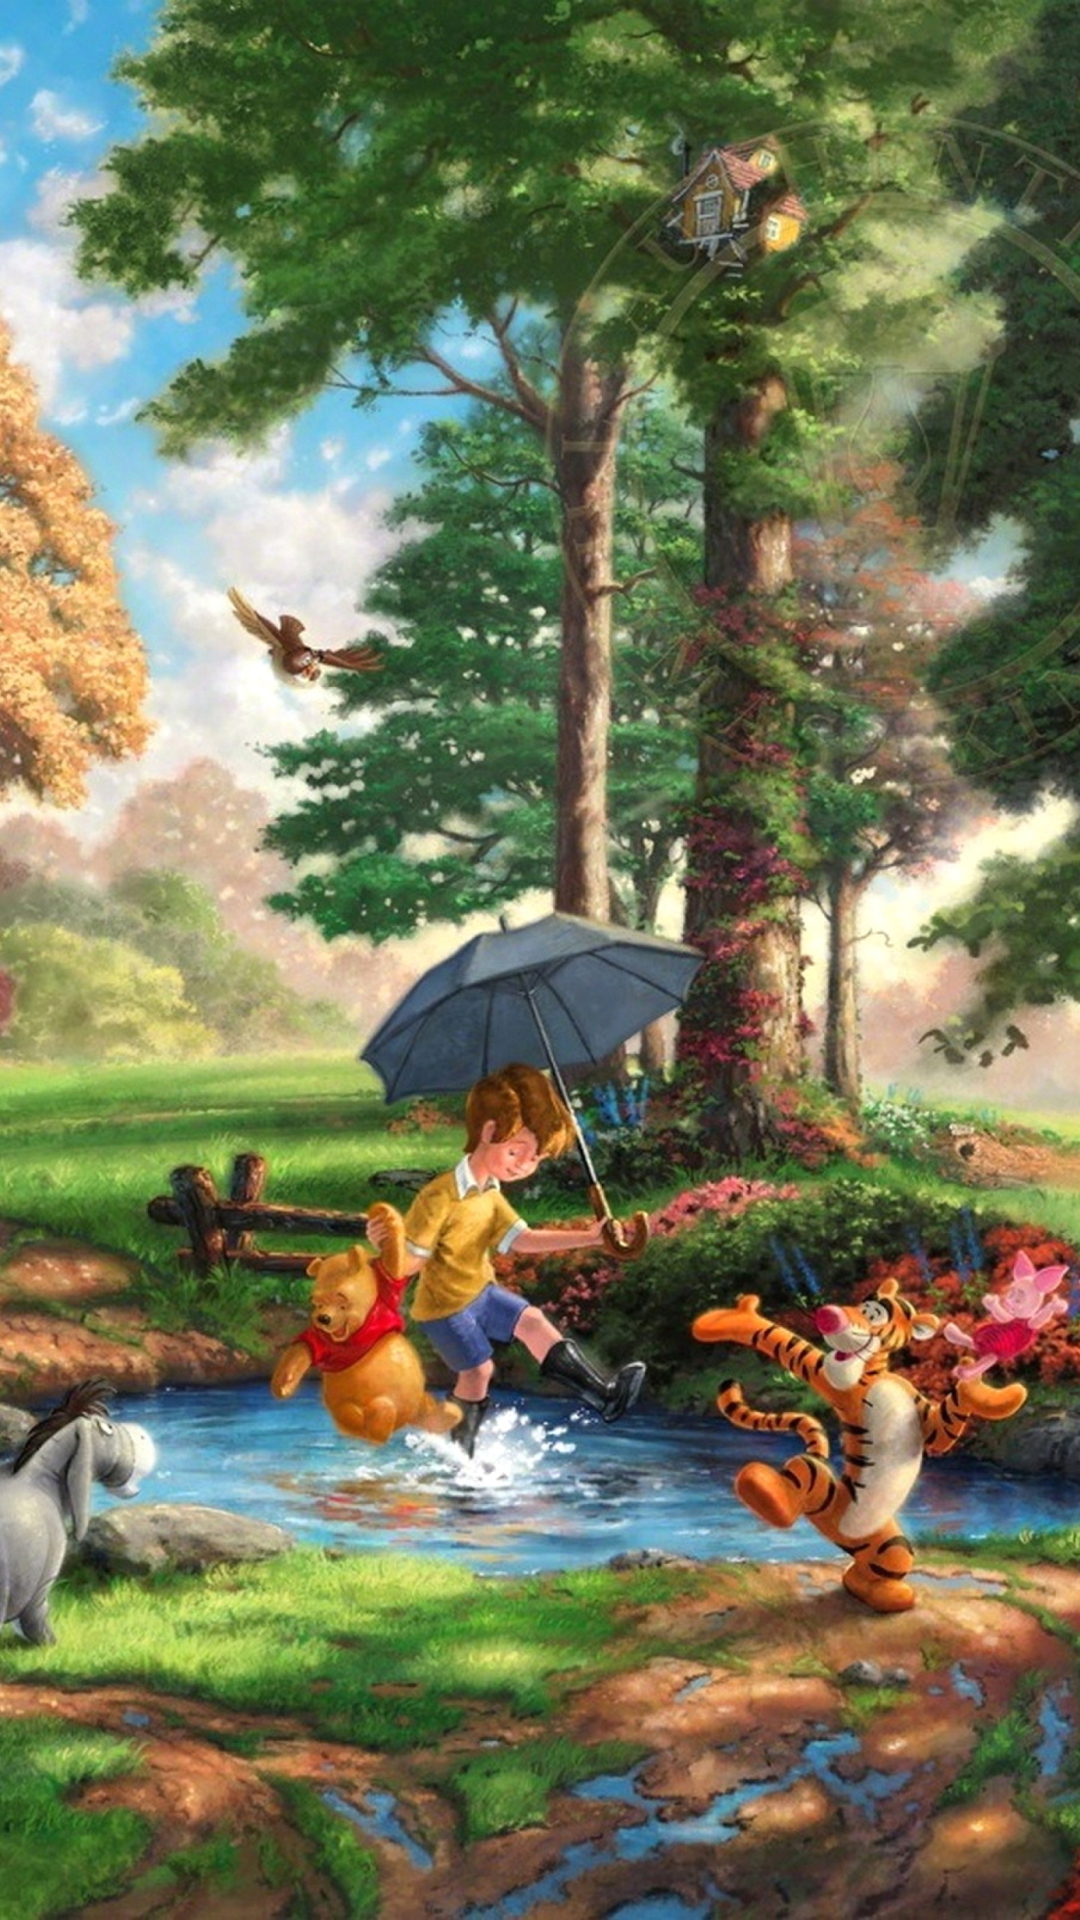 1080x1920 Winnie The Pooh And Friends Wallpaper for Nokia Lumia 1520